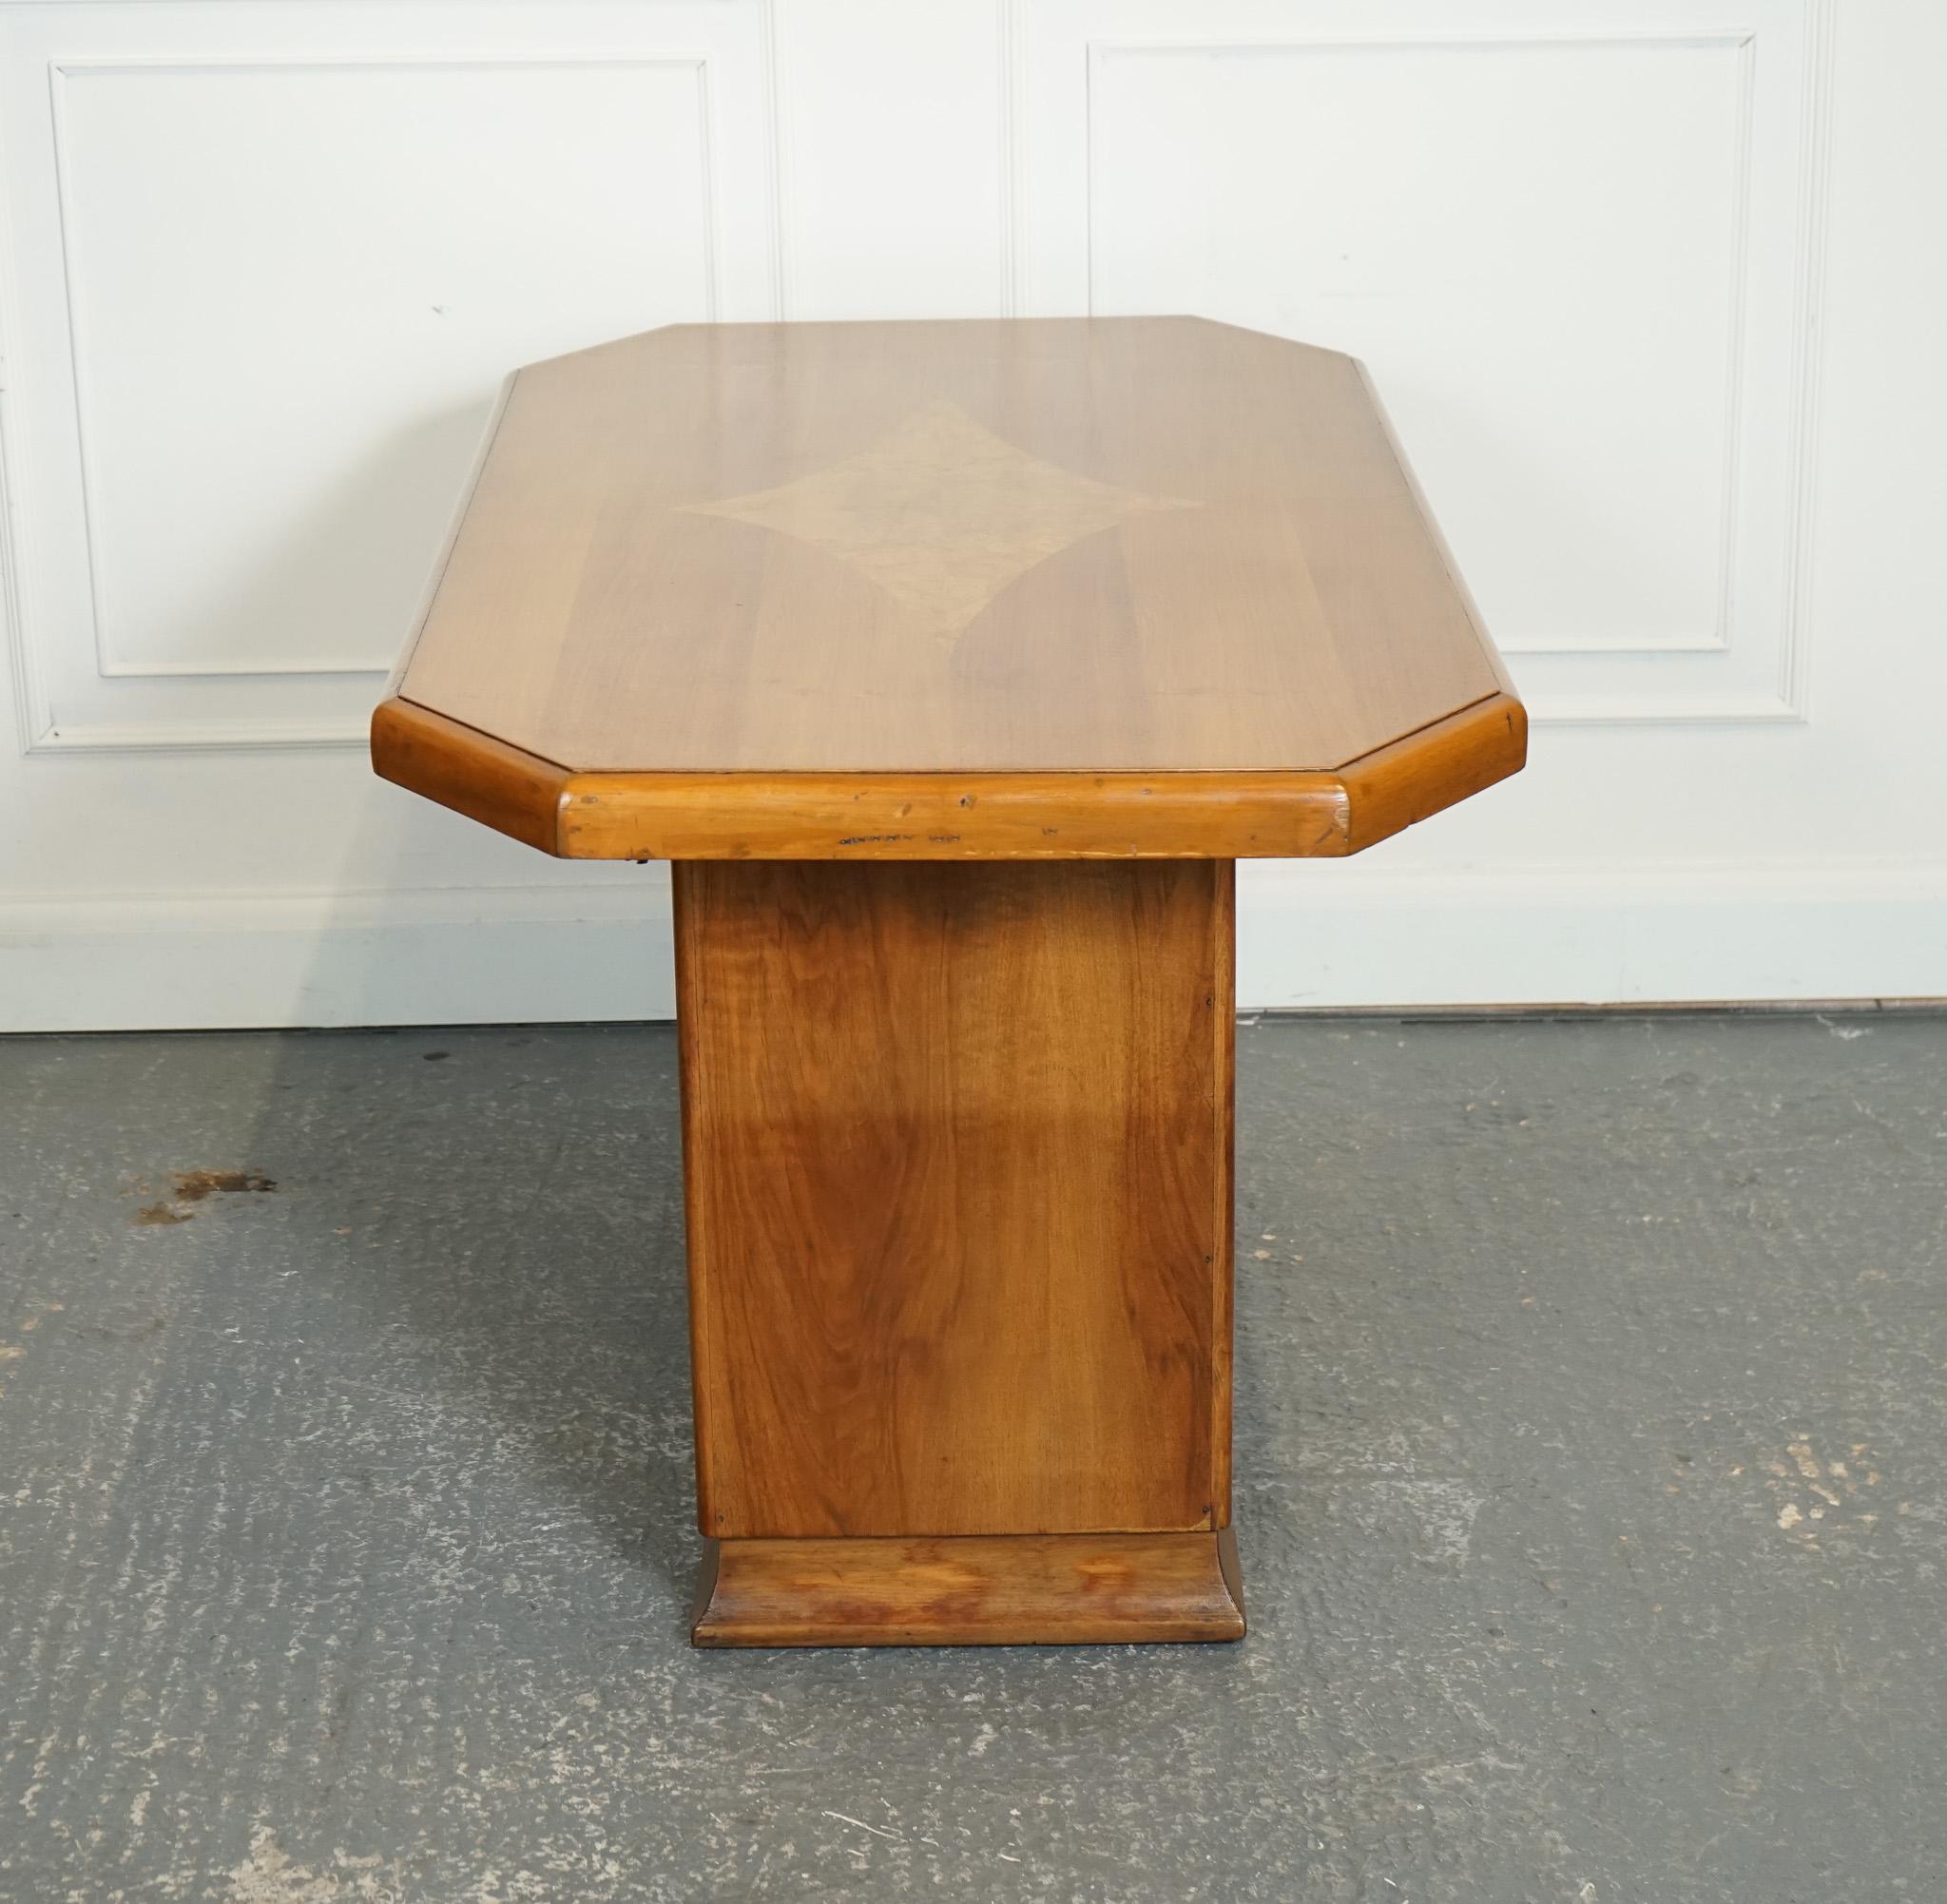 British VINTAGE ART DECO WALNUT DINiNG TABLE 4 TO 6 PERSON J1 For Sale